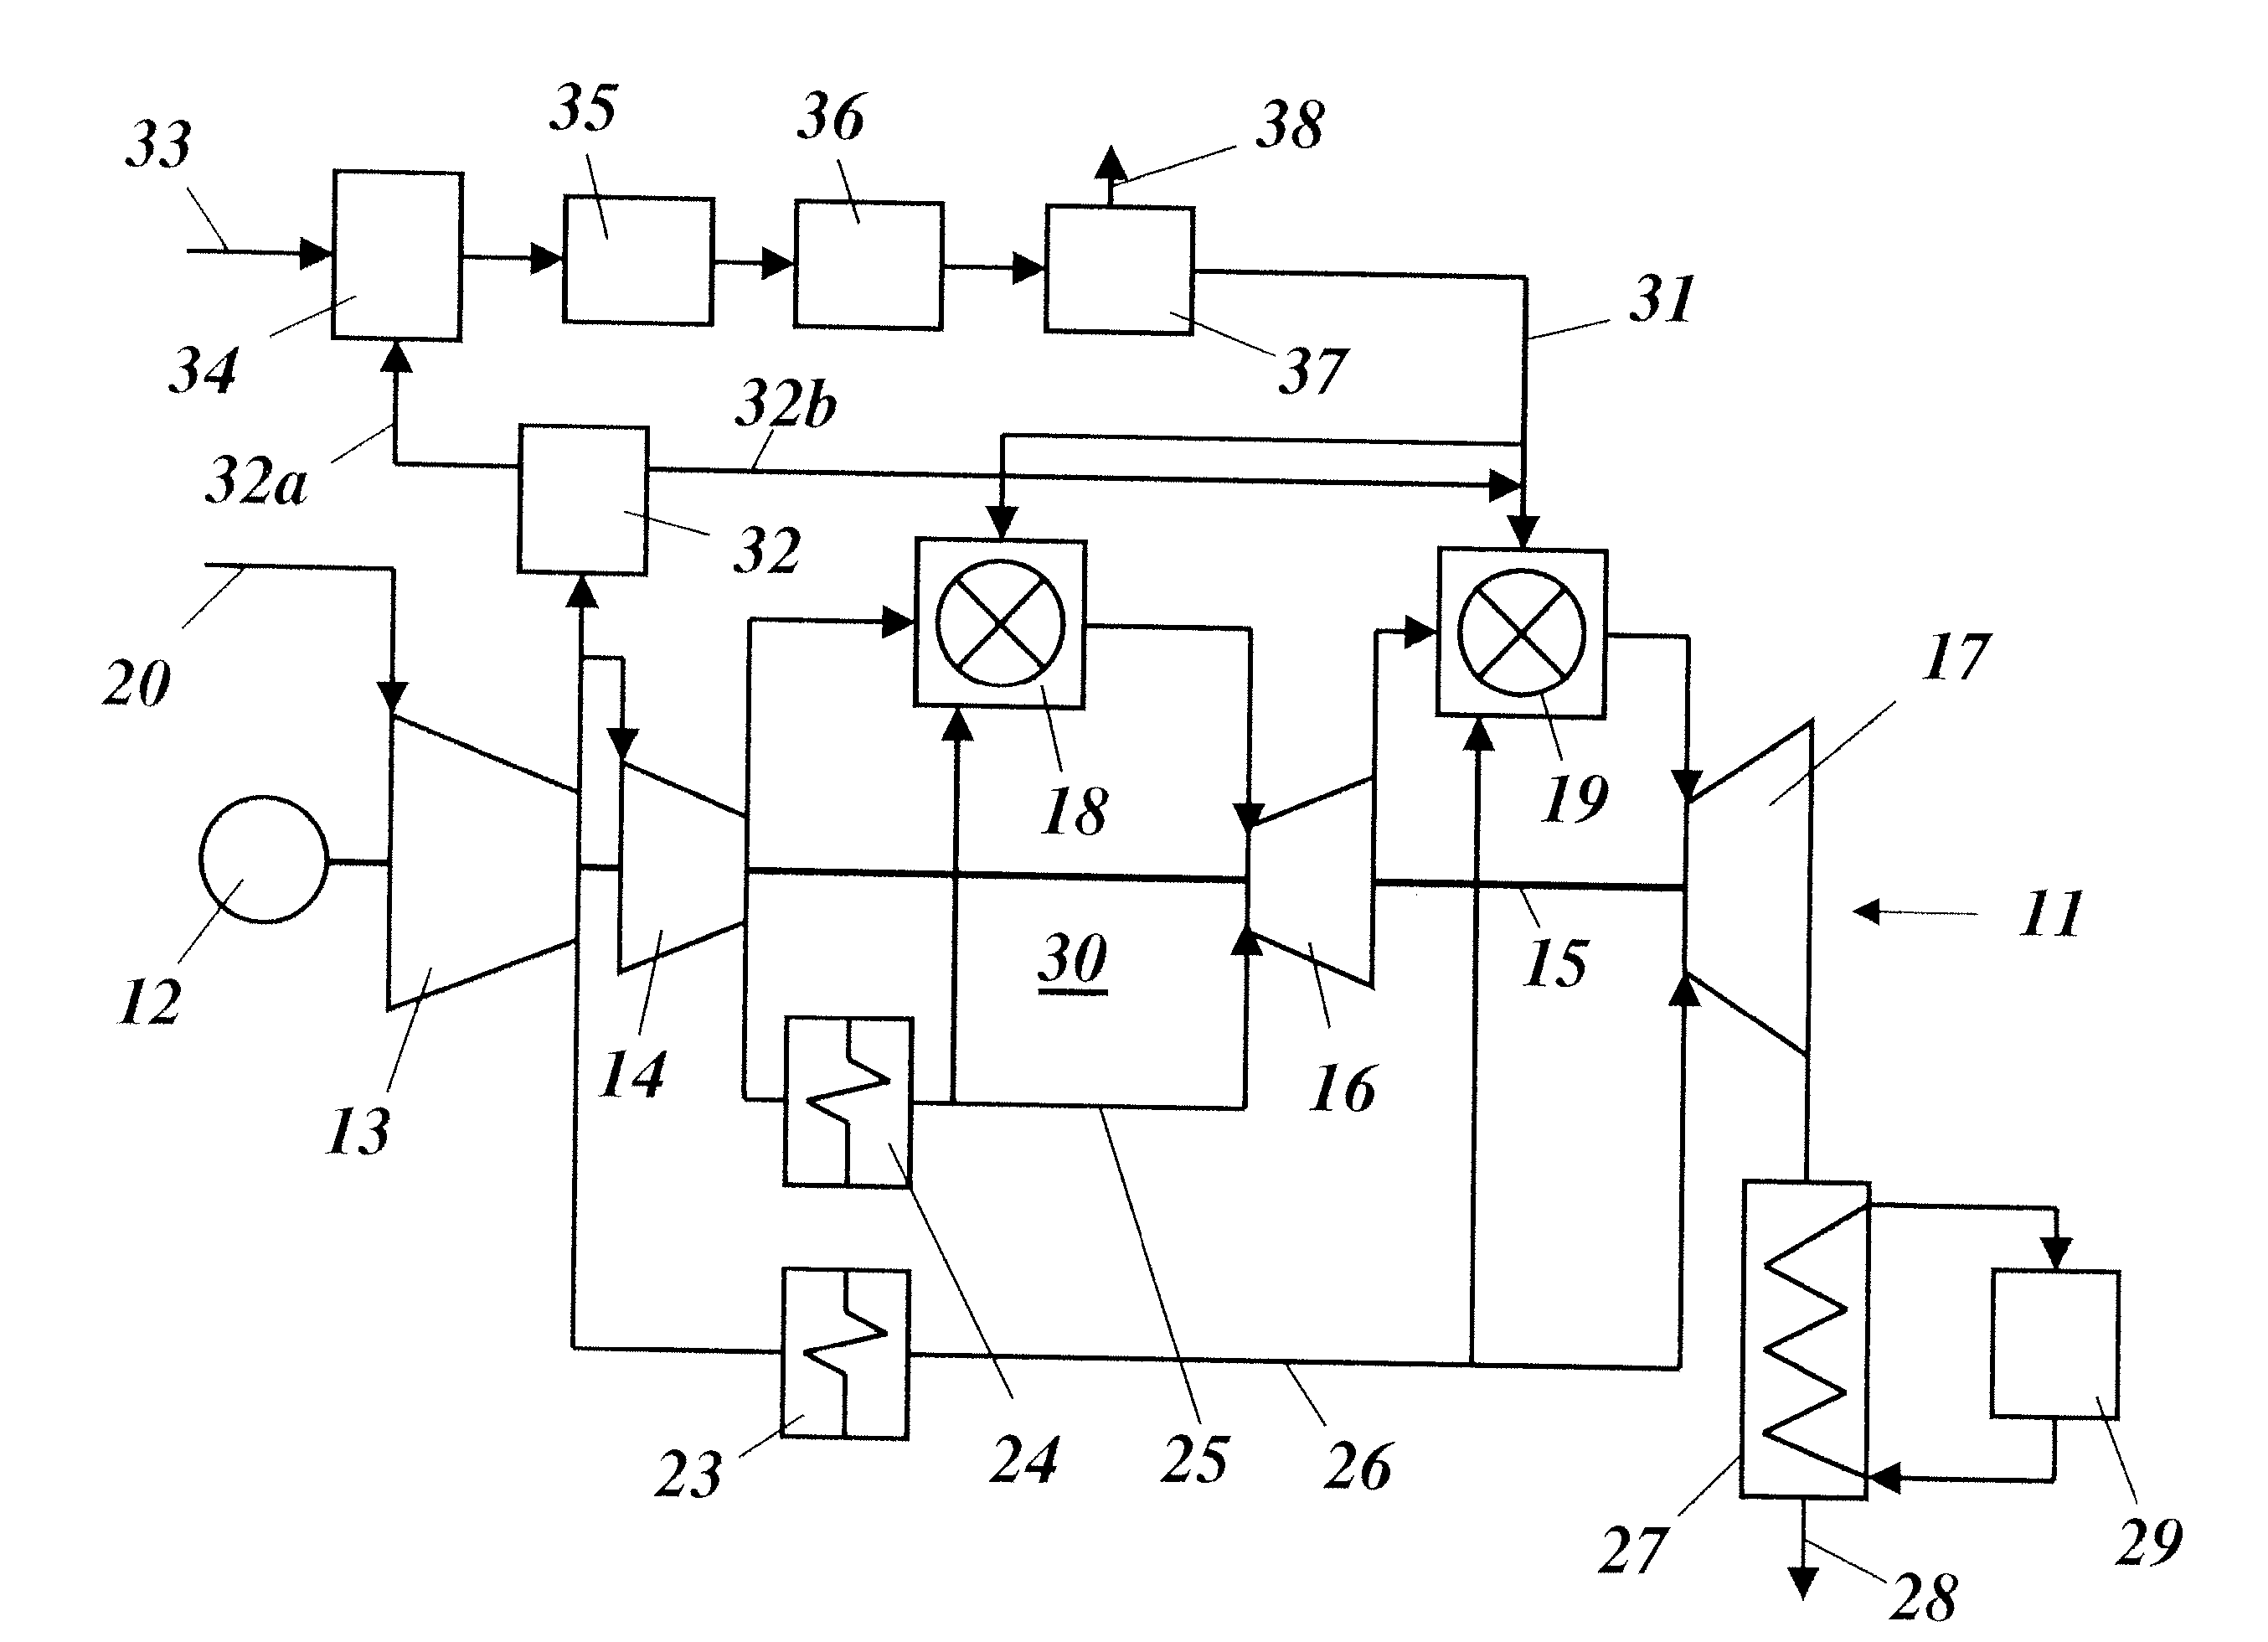 Method for operating a gas turbine